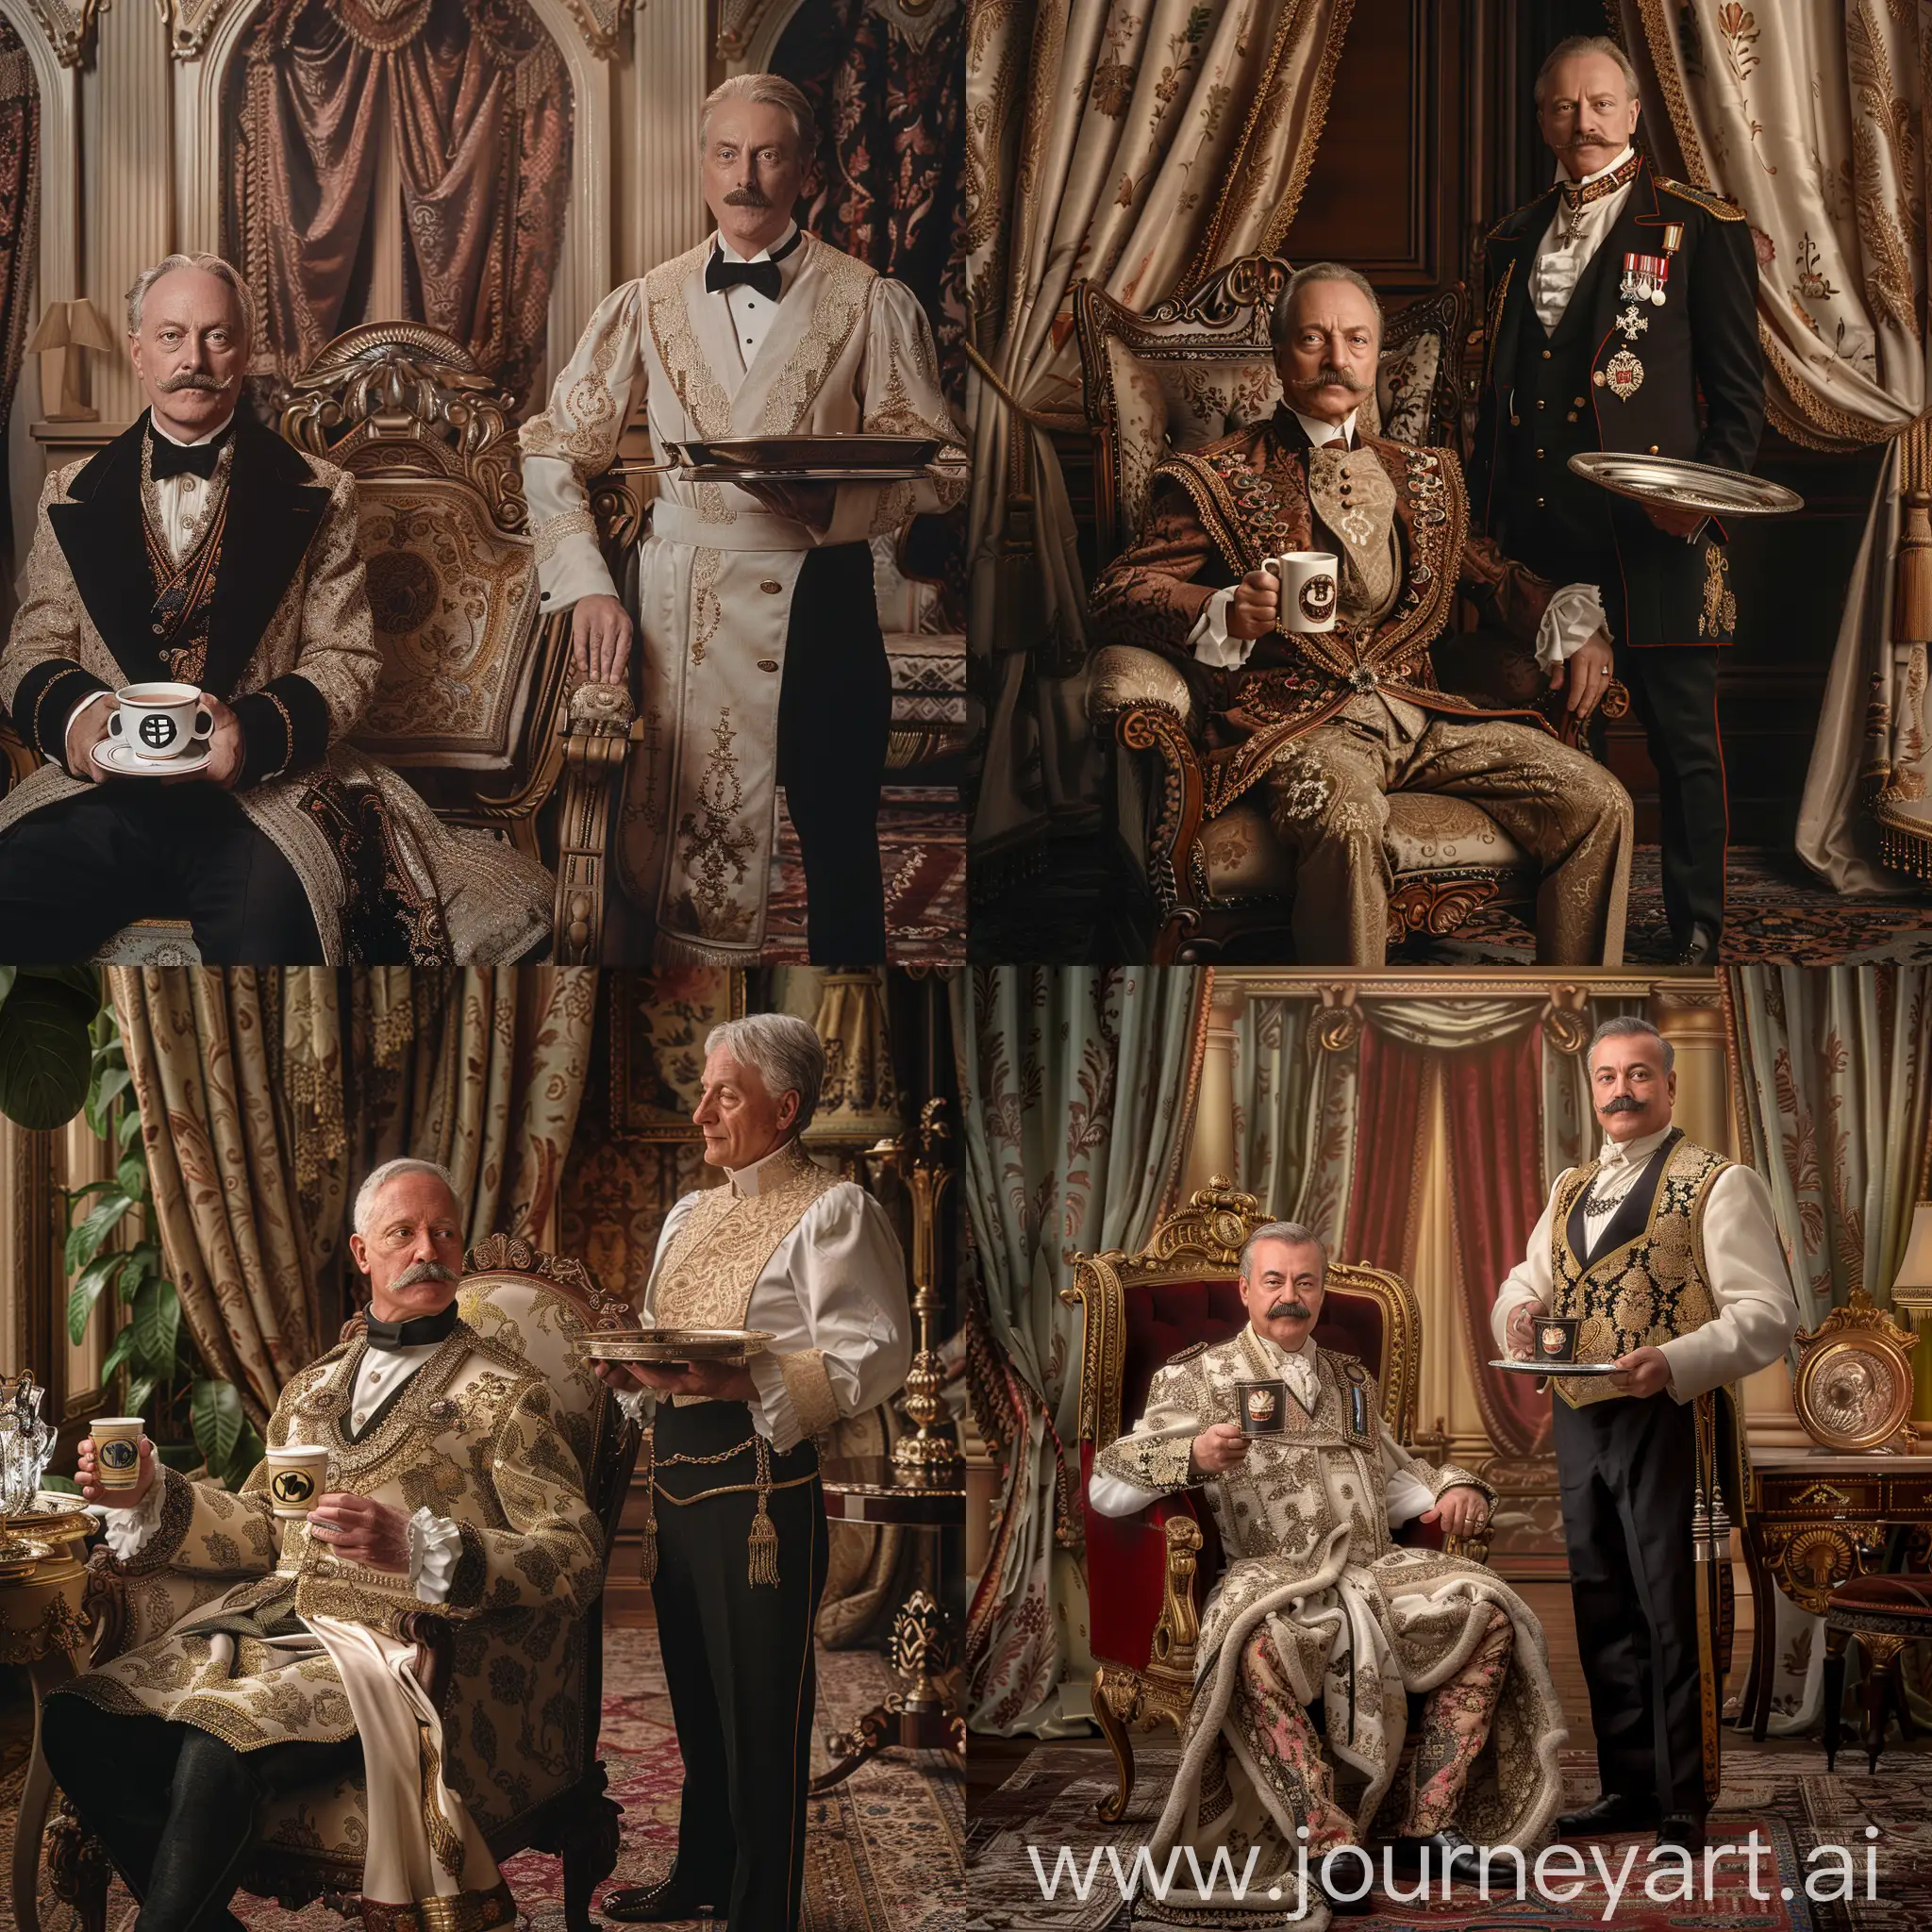 A stately scene set in the 1900s, featuring a regal middle-aged man with a mustache, sitting in an ornately carved chair, dressed in traditional royal attire, and holding an espresso cup with a logo. He and his butler, who is also dressed formally and standing next to him with a silver tray, are facing the viewer. The backdrop is a lavish room with exquisite vintage furnishings, including plush curtains and a detailed carpet, epitomizing the splendor of early 20th century European aristocracy.